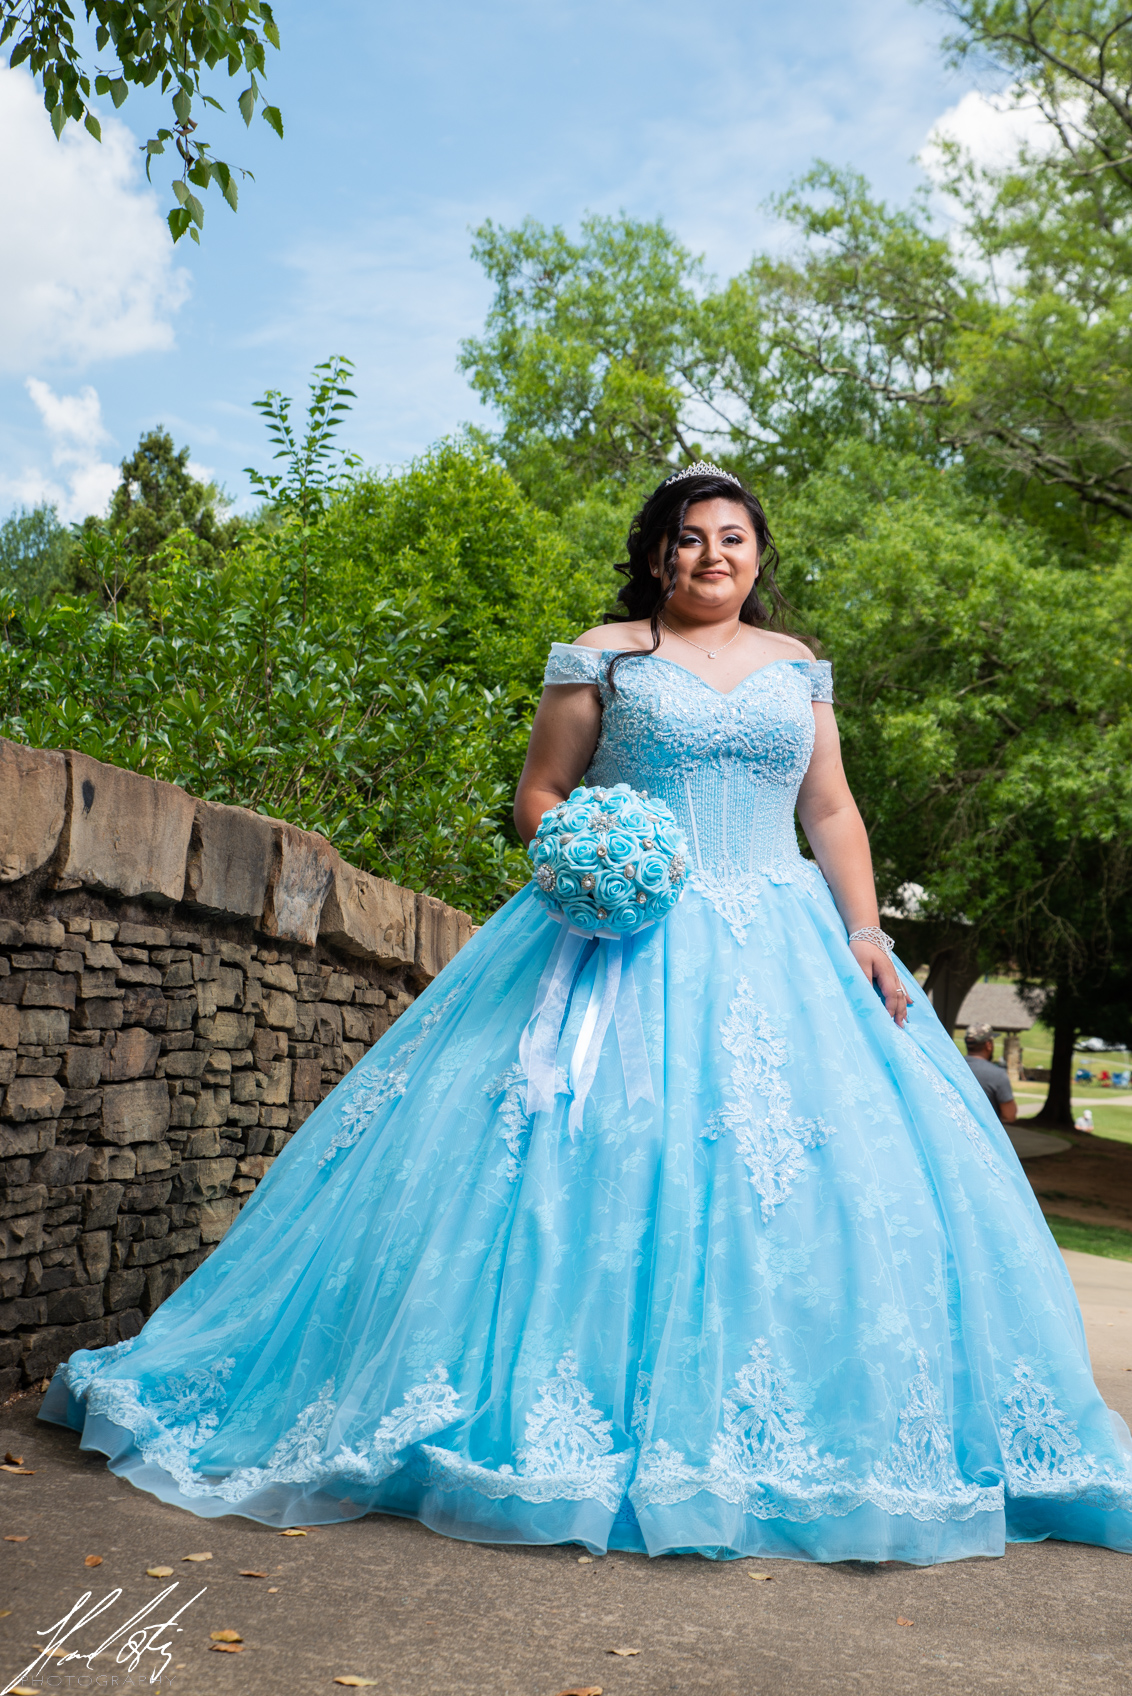 Freedom Park charlotte NC quinceañeras Photoshoot |sweet16 hortiz photography and video